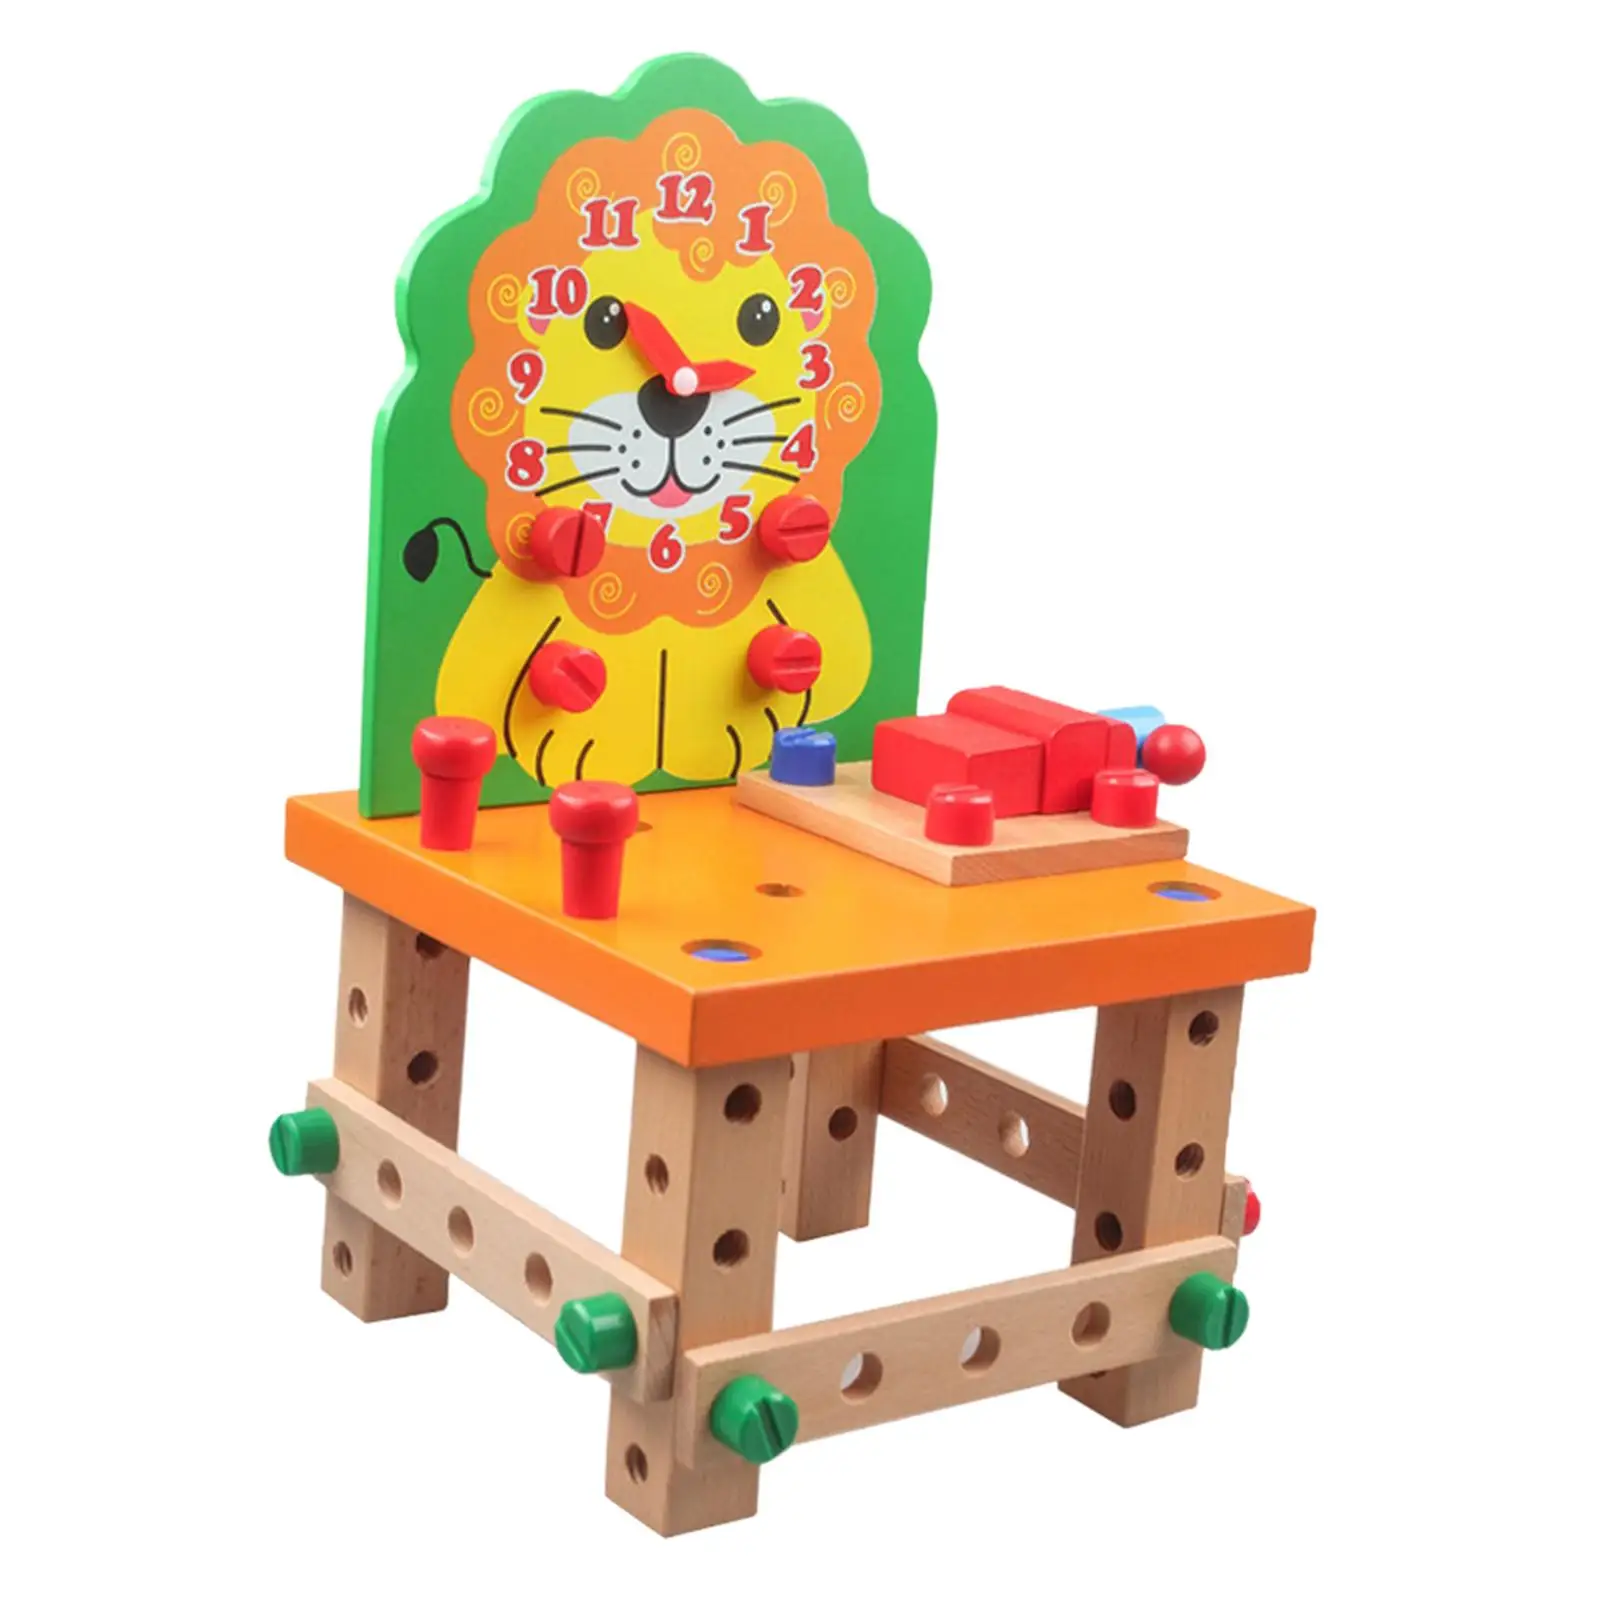 Wooden Assembling Chair Educational Building Toy for Toddler Birthday Gifts